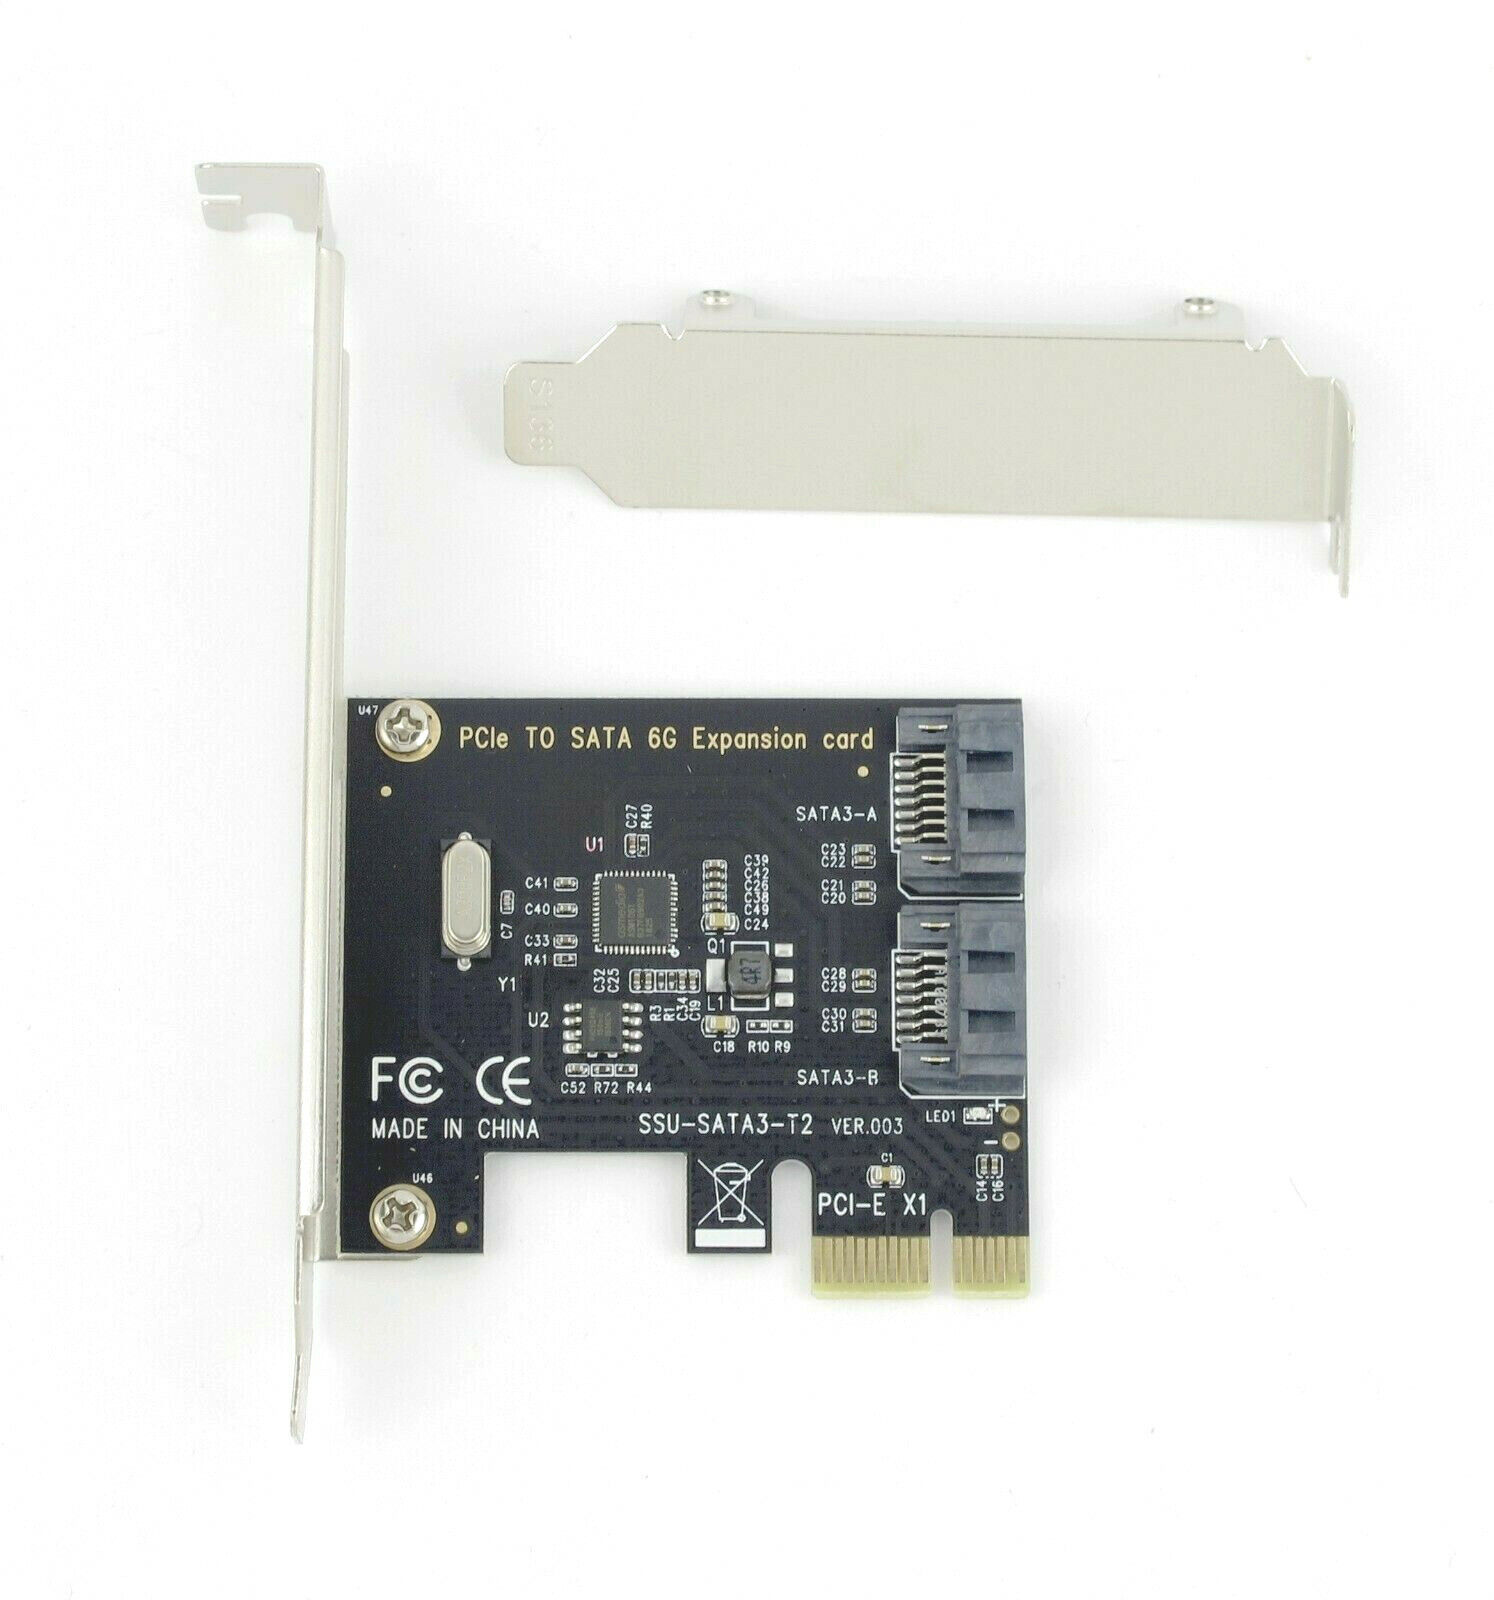 PCIE Pci-e to SATA 3.0 Internal 6Gbps 2-Port Expansion Controller Card Adapter